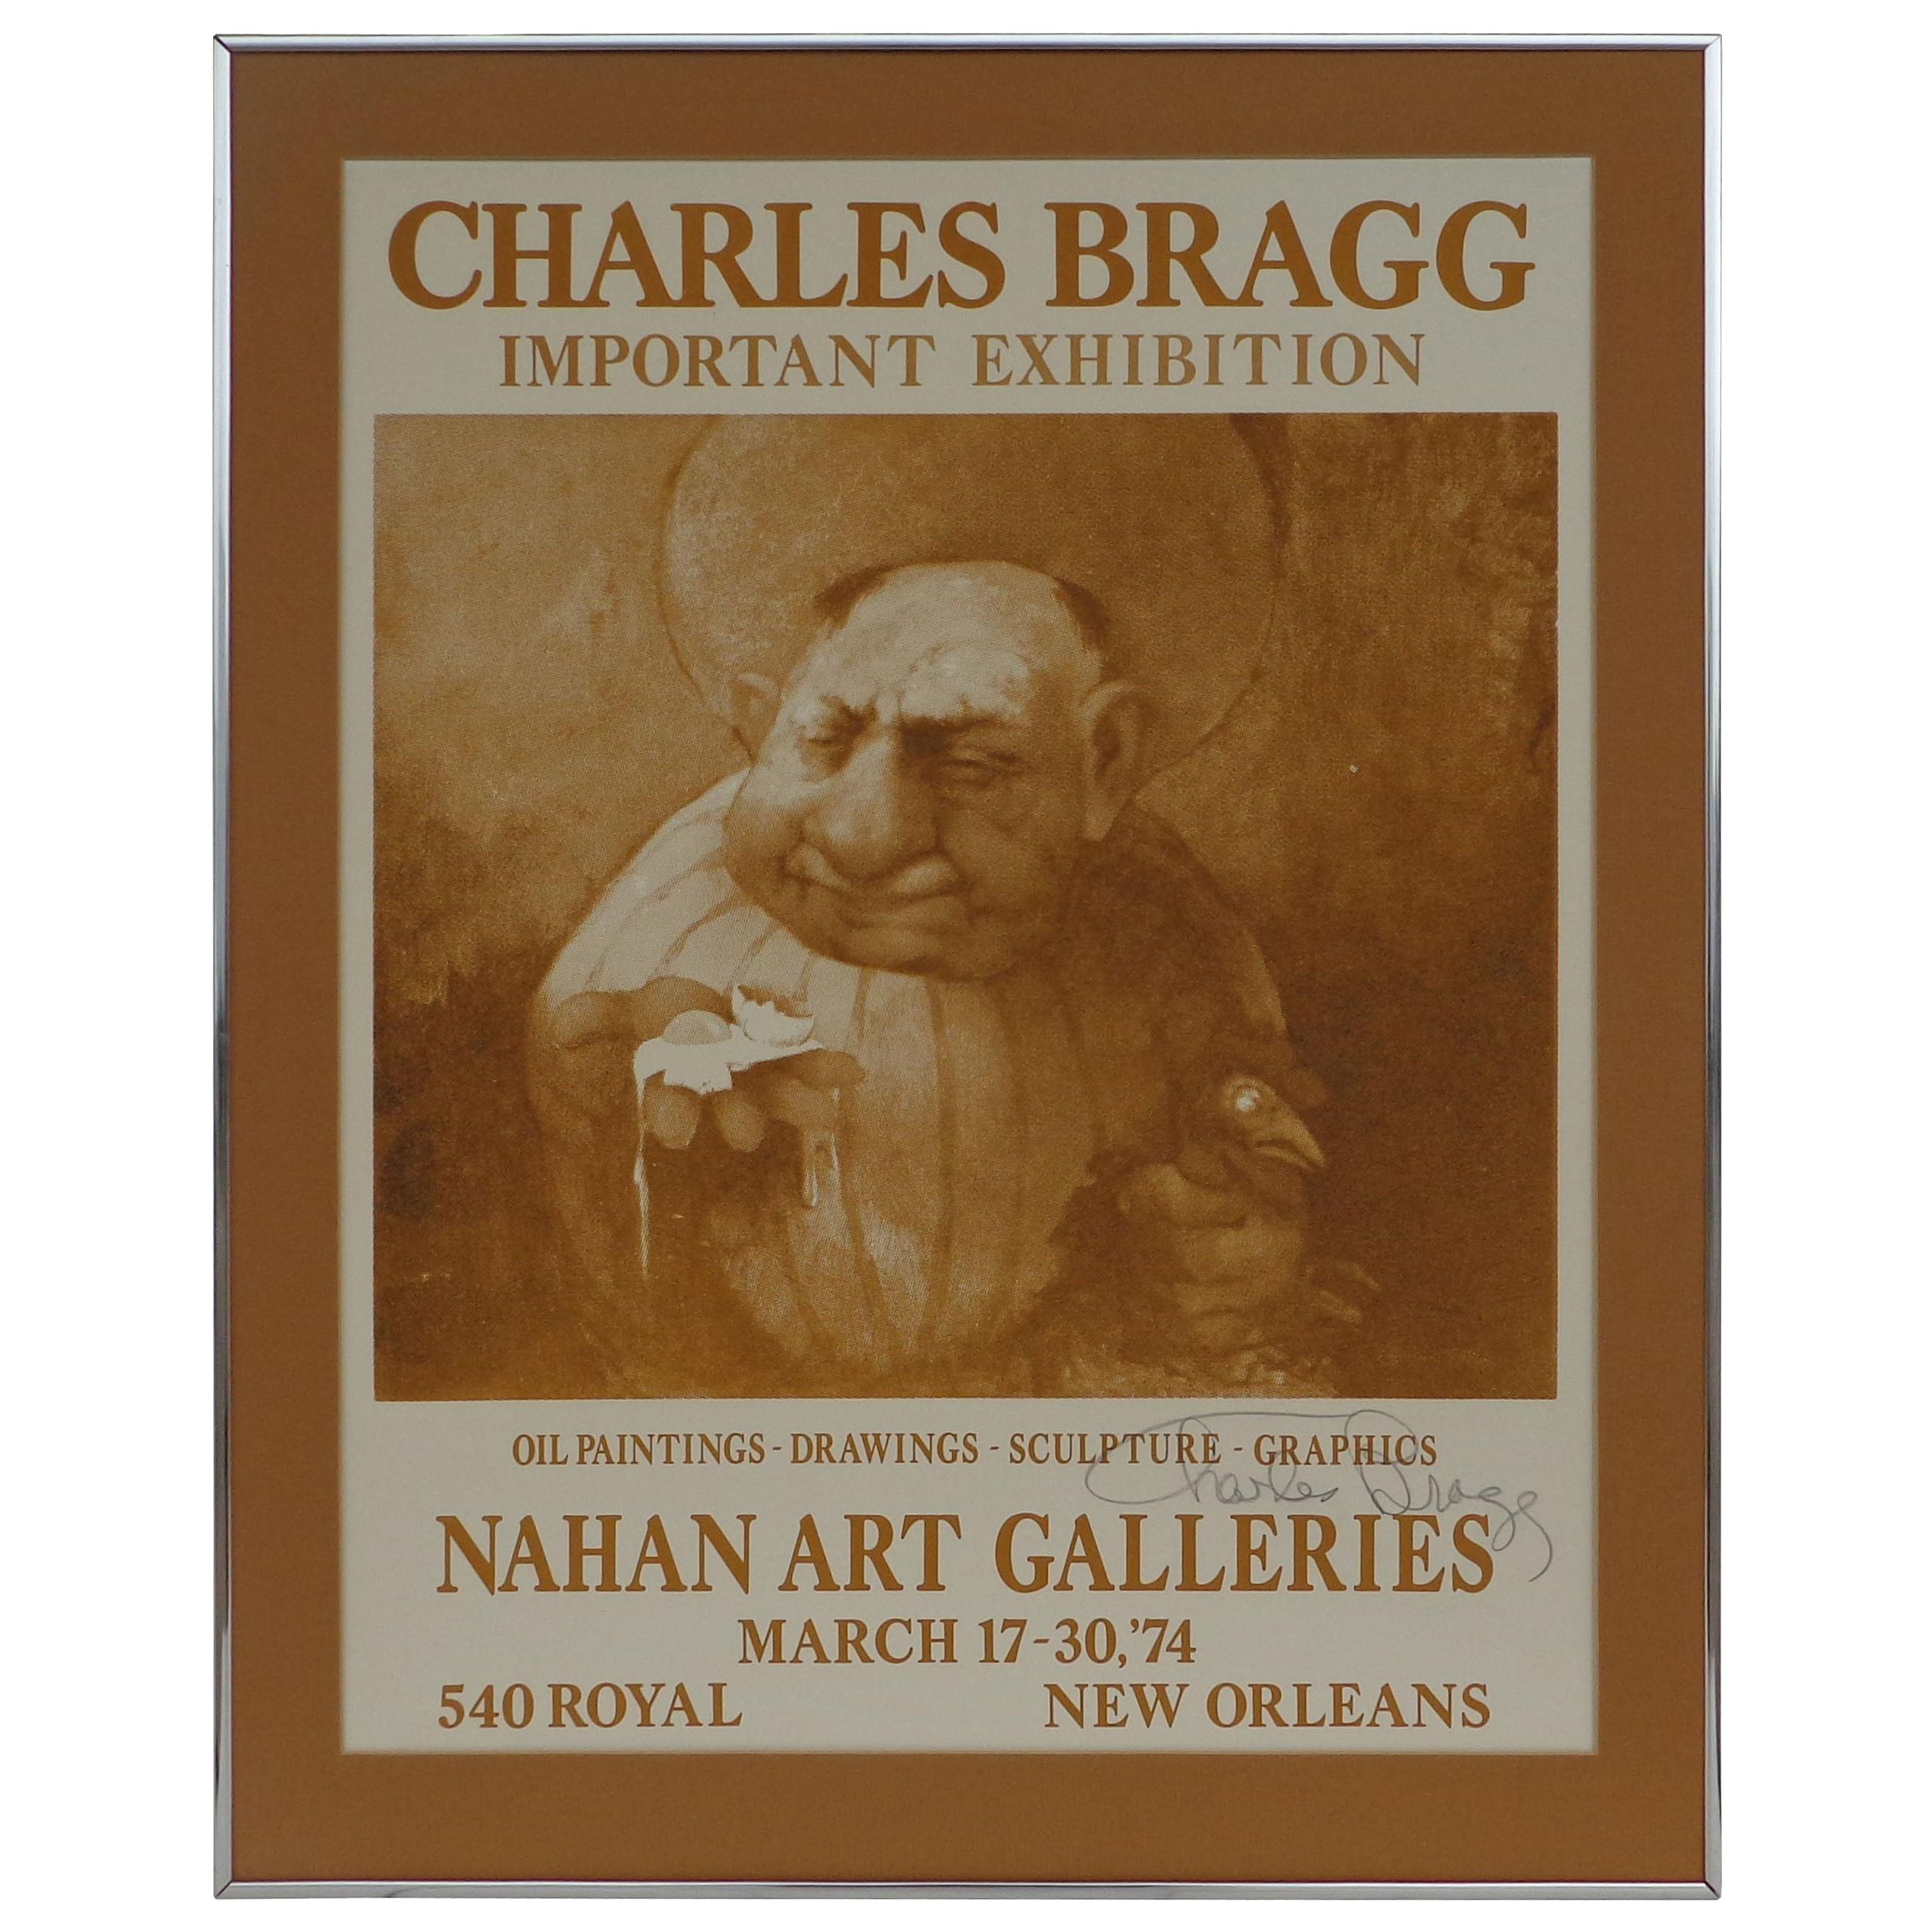 Signed 1974 Charles Bragg New Orleans "Important Exhibition" Poster